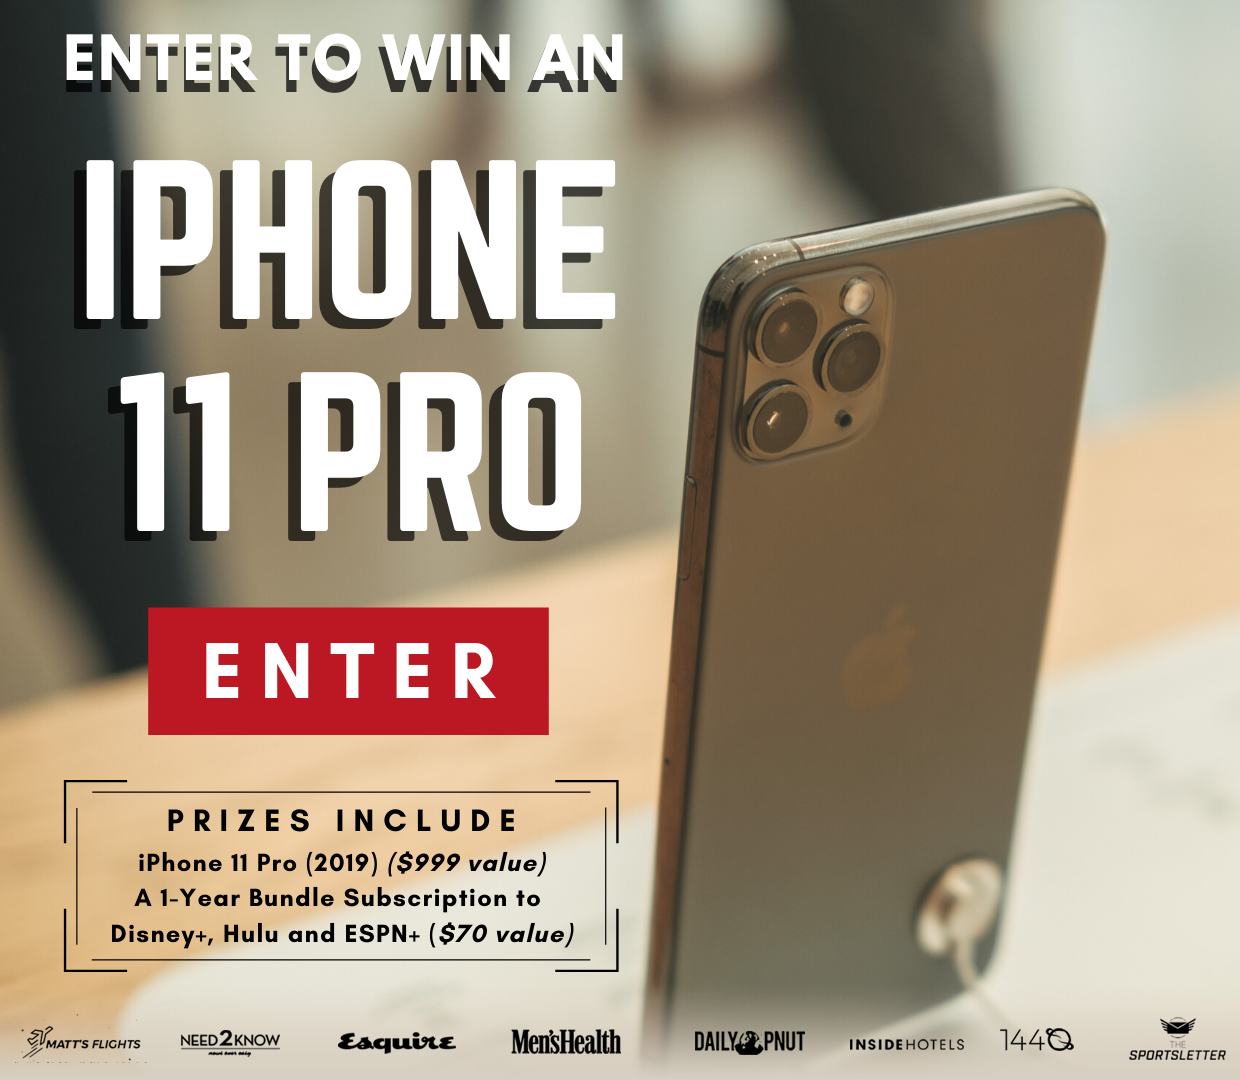 Enter now for a chance to win the iPhone 11 Pro ($999 value), and a one-year subscription to Disney+, Hulu and ESPN+ ($70 value).